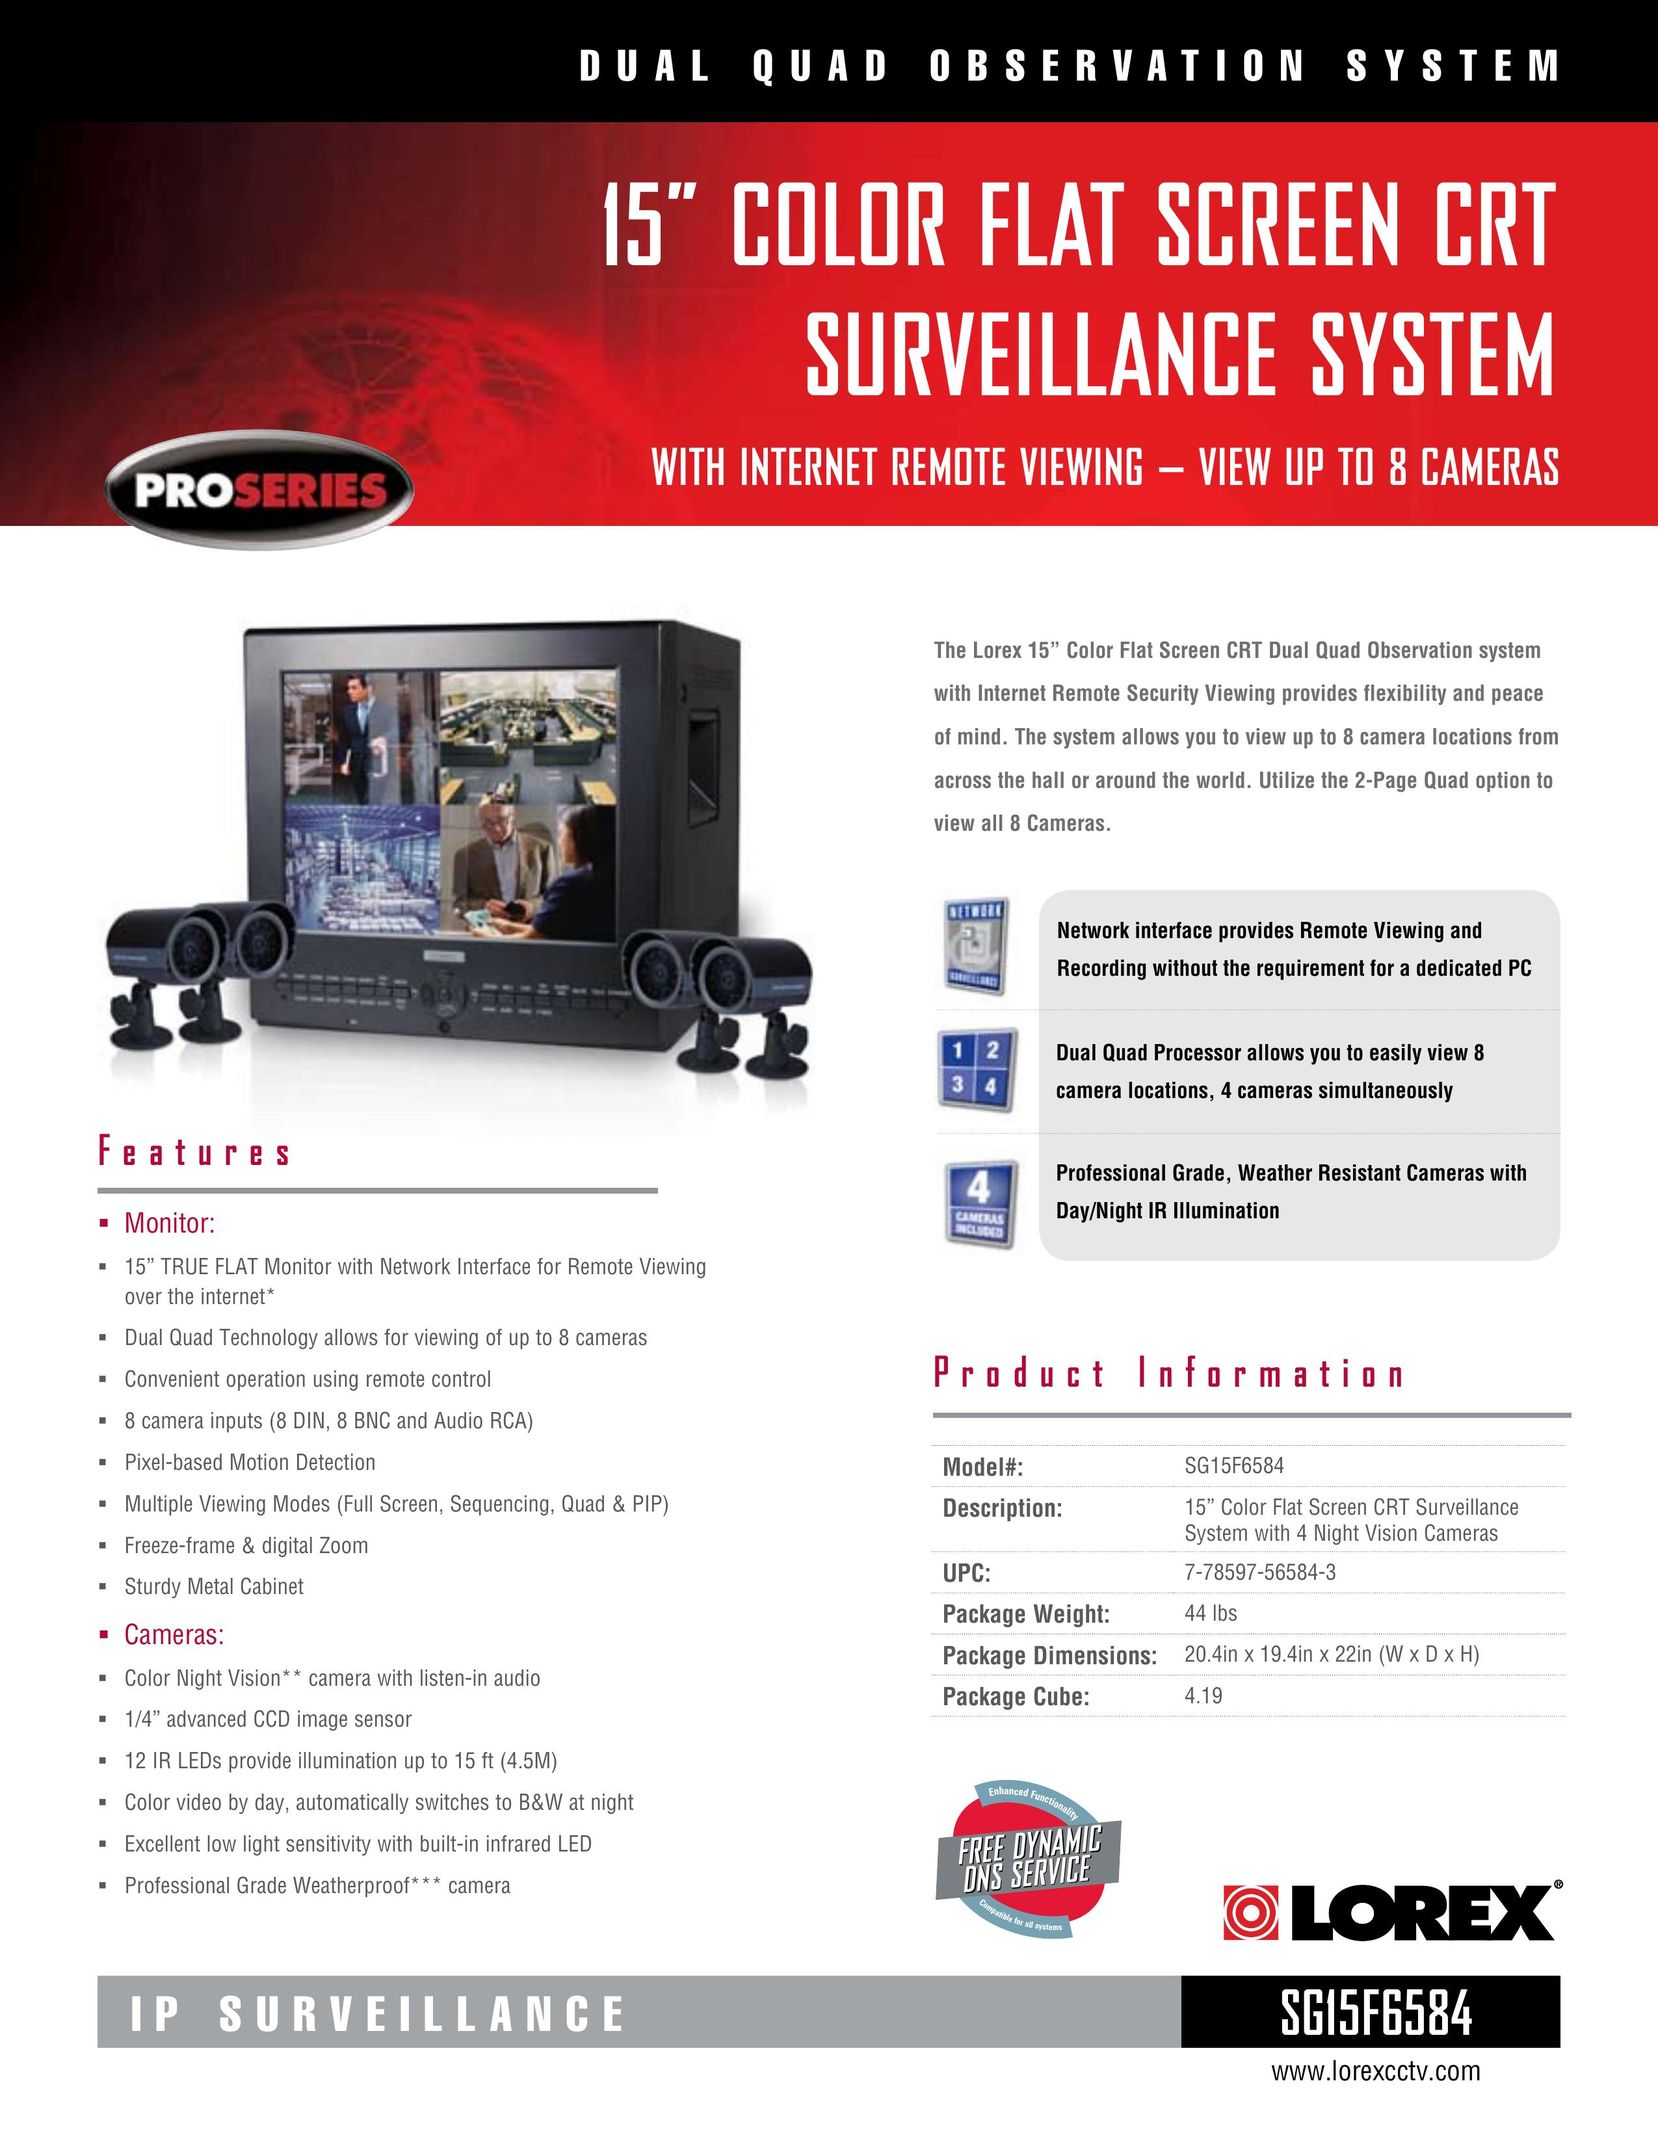 LOREX Technology SG15F6584 Home Security System User Manual